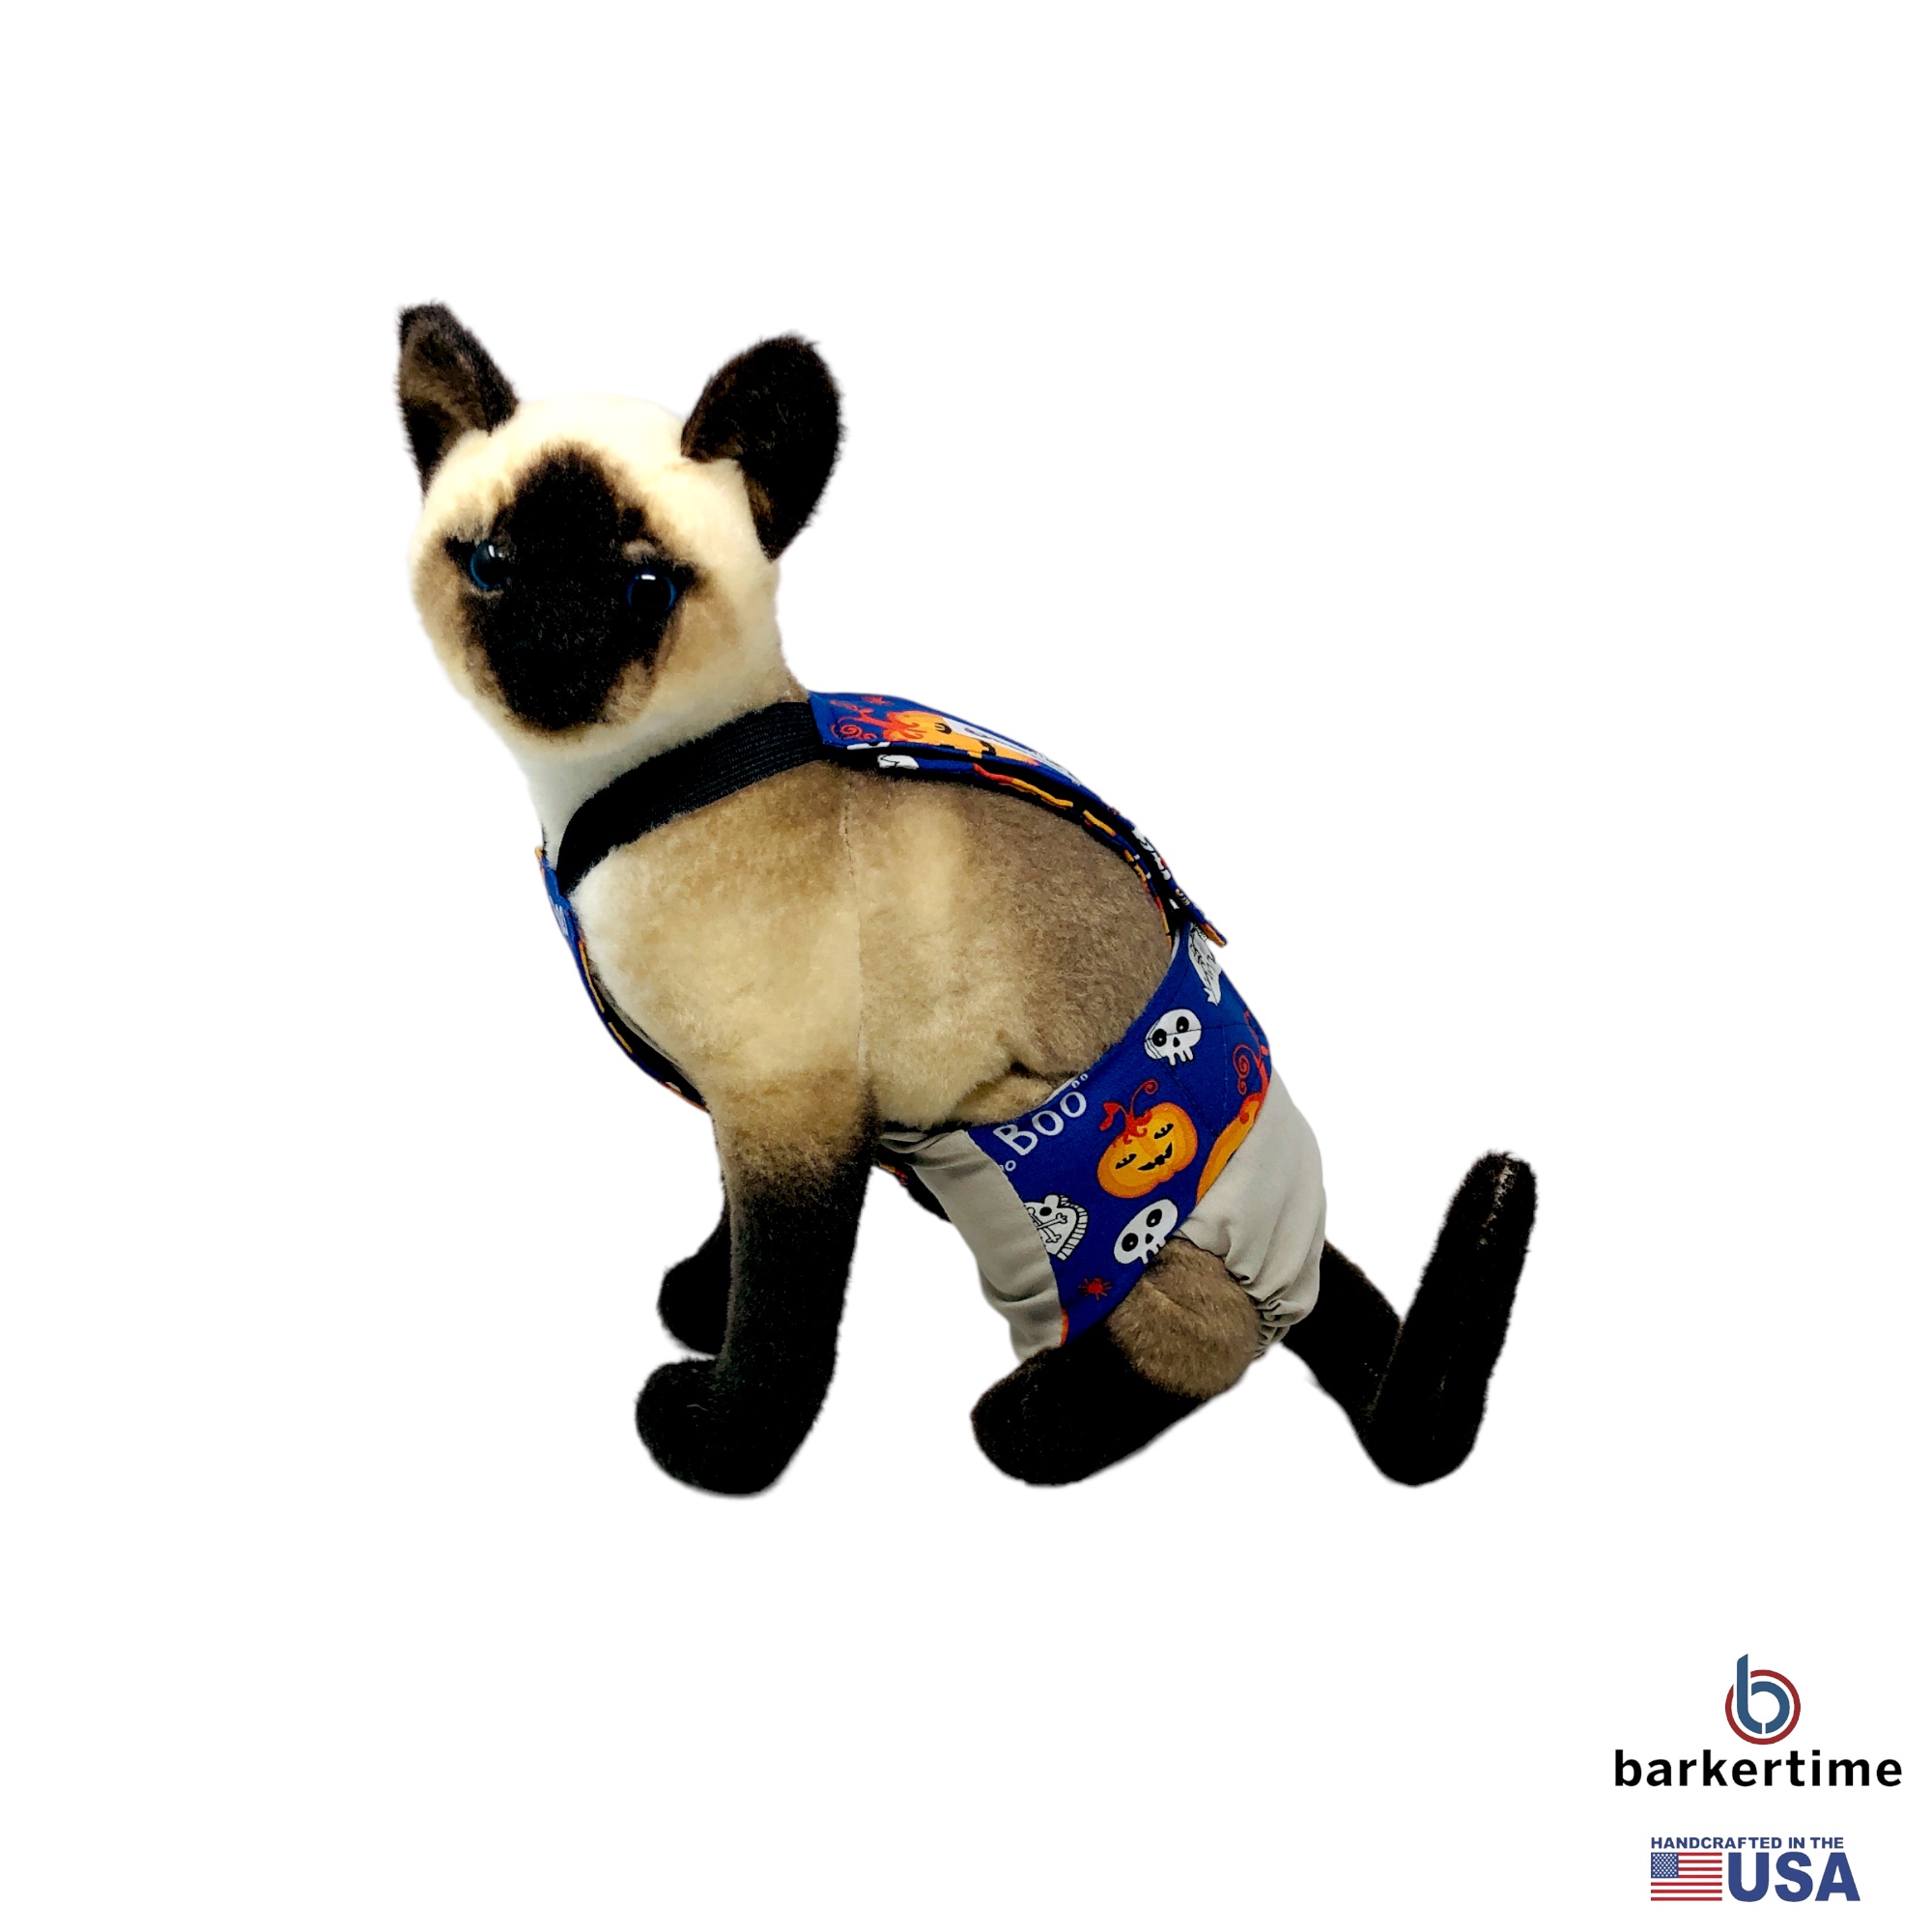 Barkertime Cat Diapers - Made in USA - Barkertime